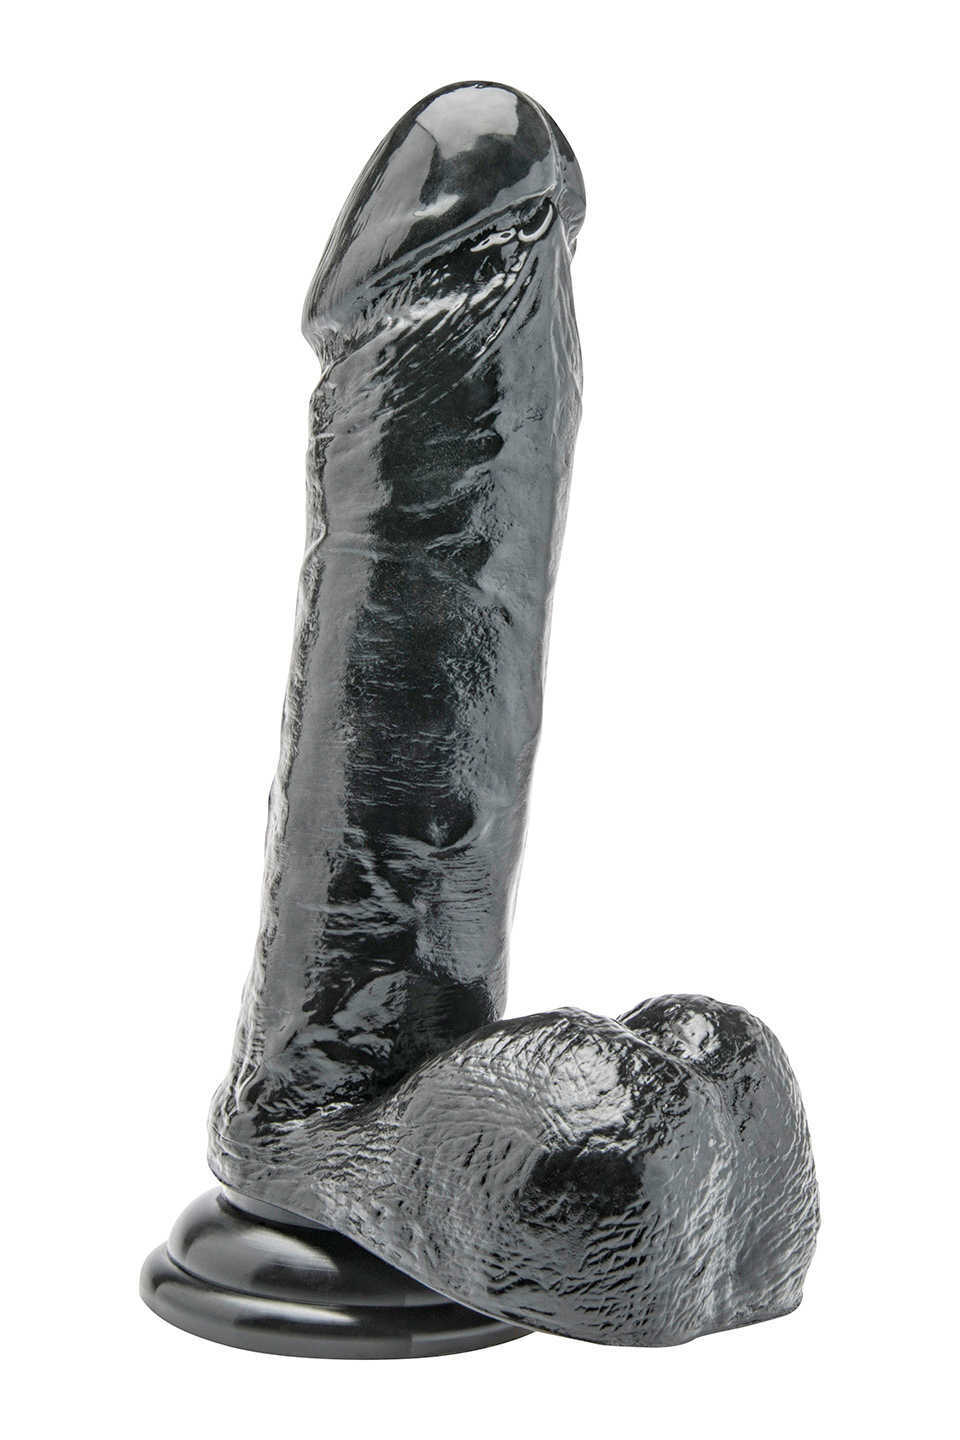 Get Real by TOYJOY Dildo 7 Inch